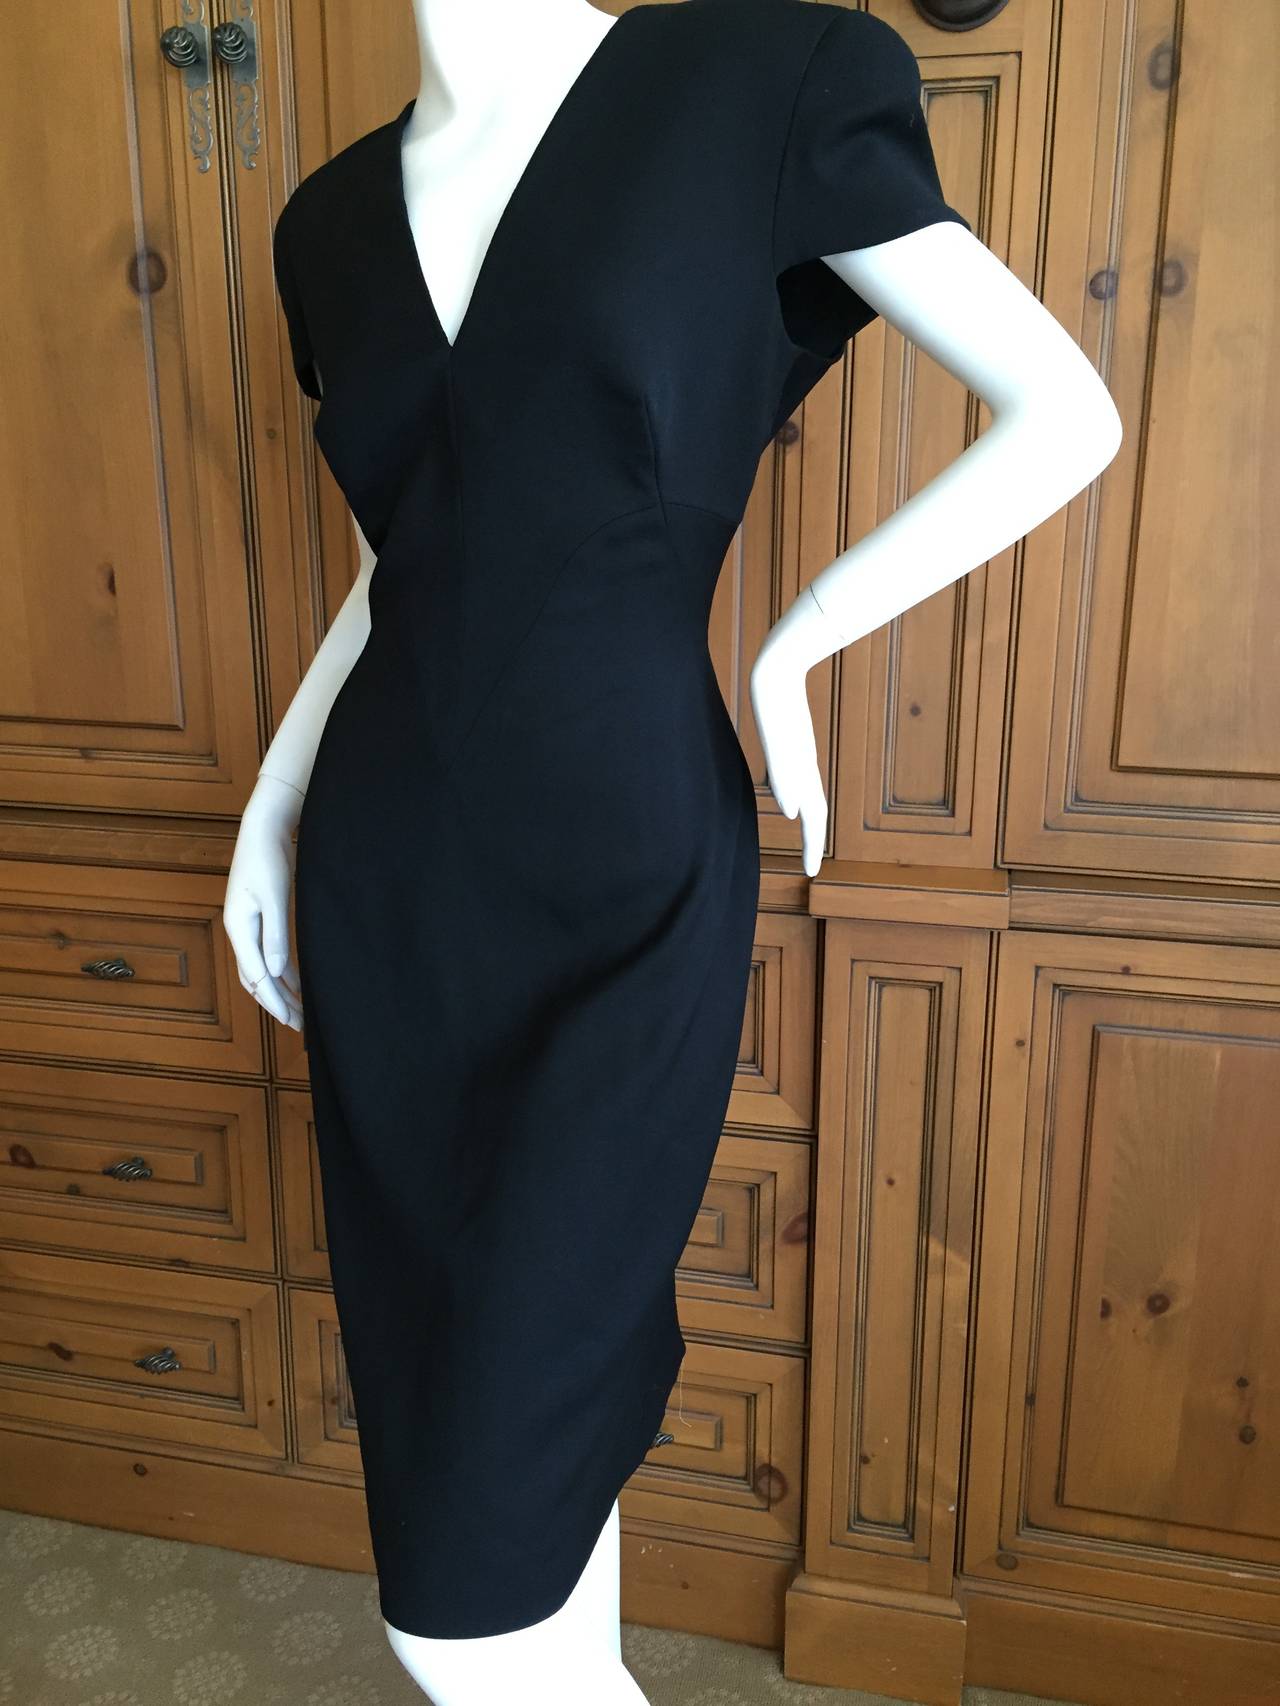 Beautiful little black dress from Alexander McQueen.
Wool lined in silk blend.
Size 46
New with Tags